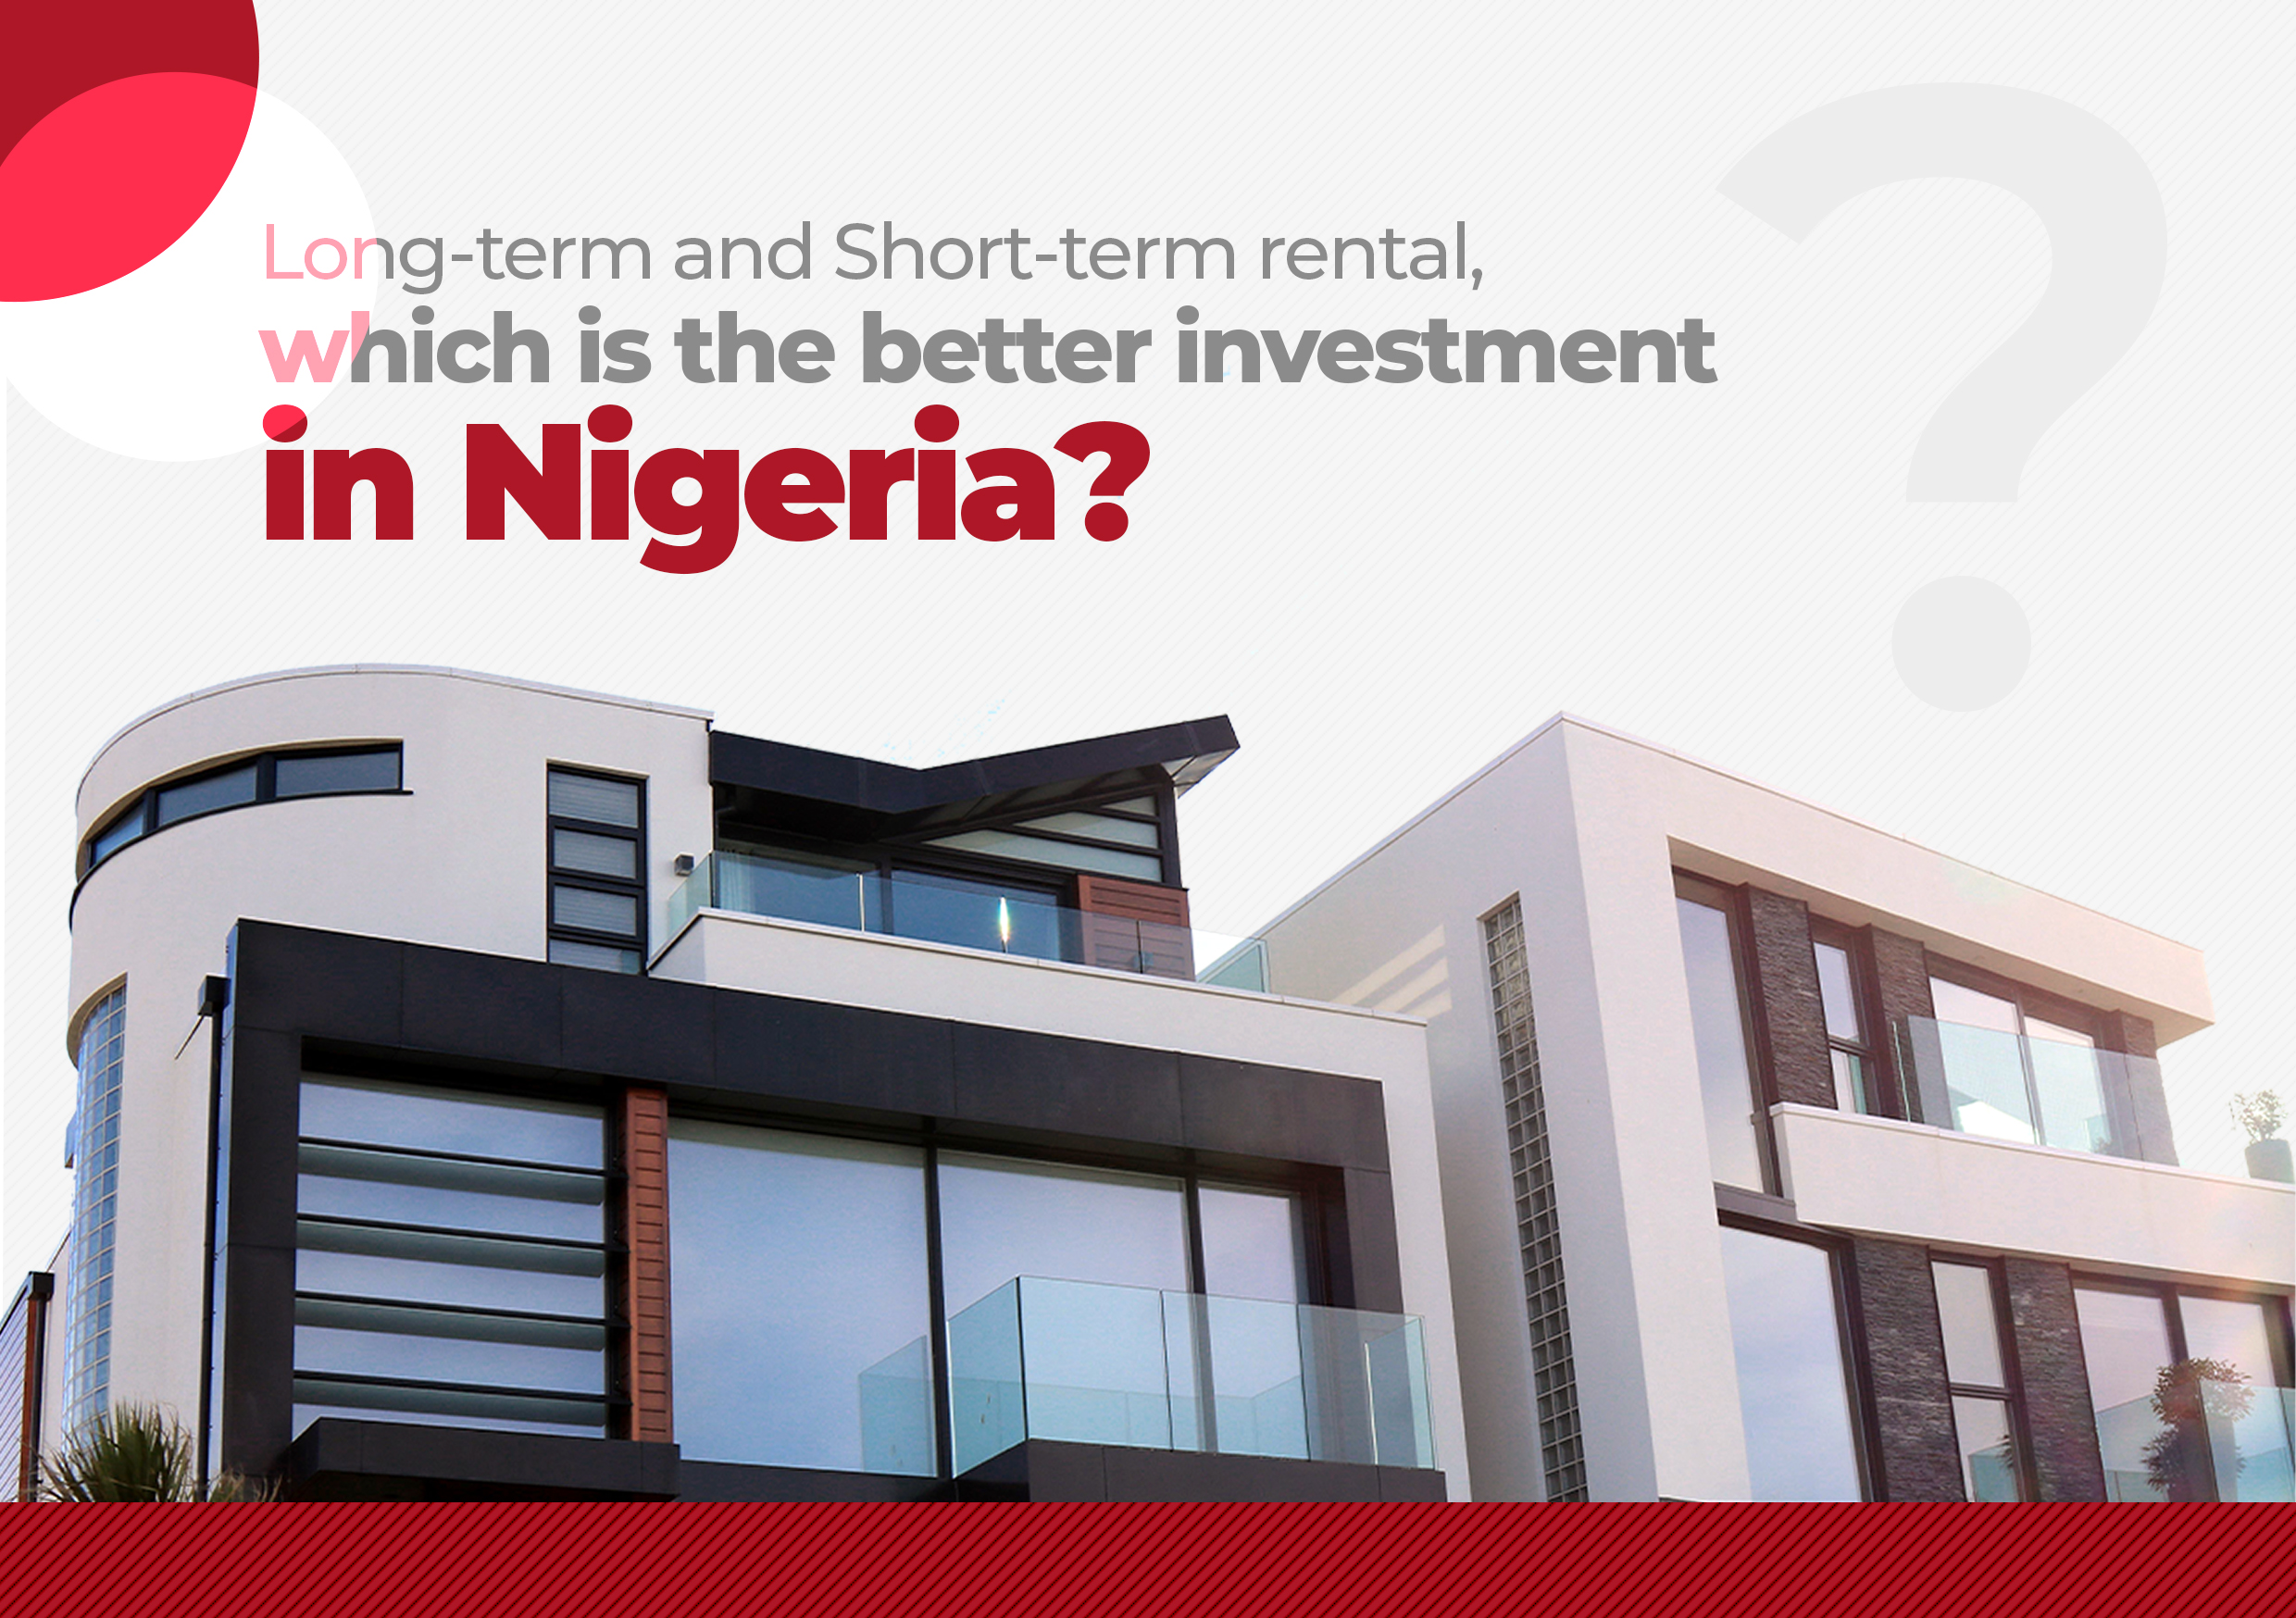 Long-term and Short-term rental Which is the better investment in Nigeria